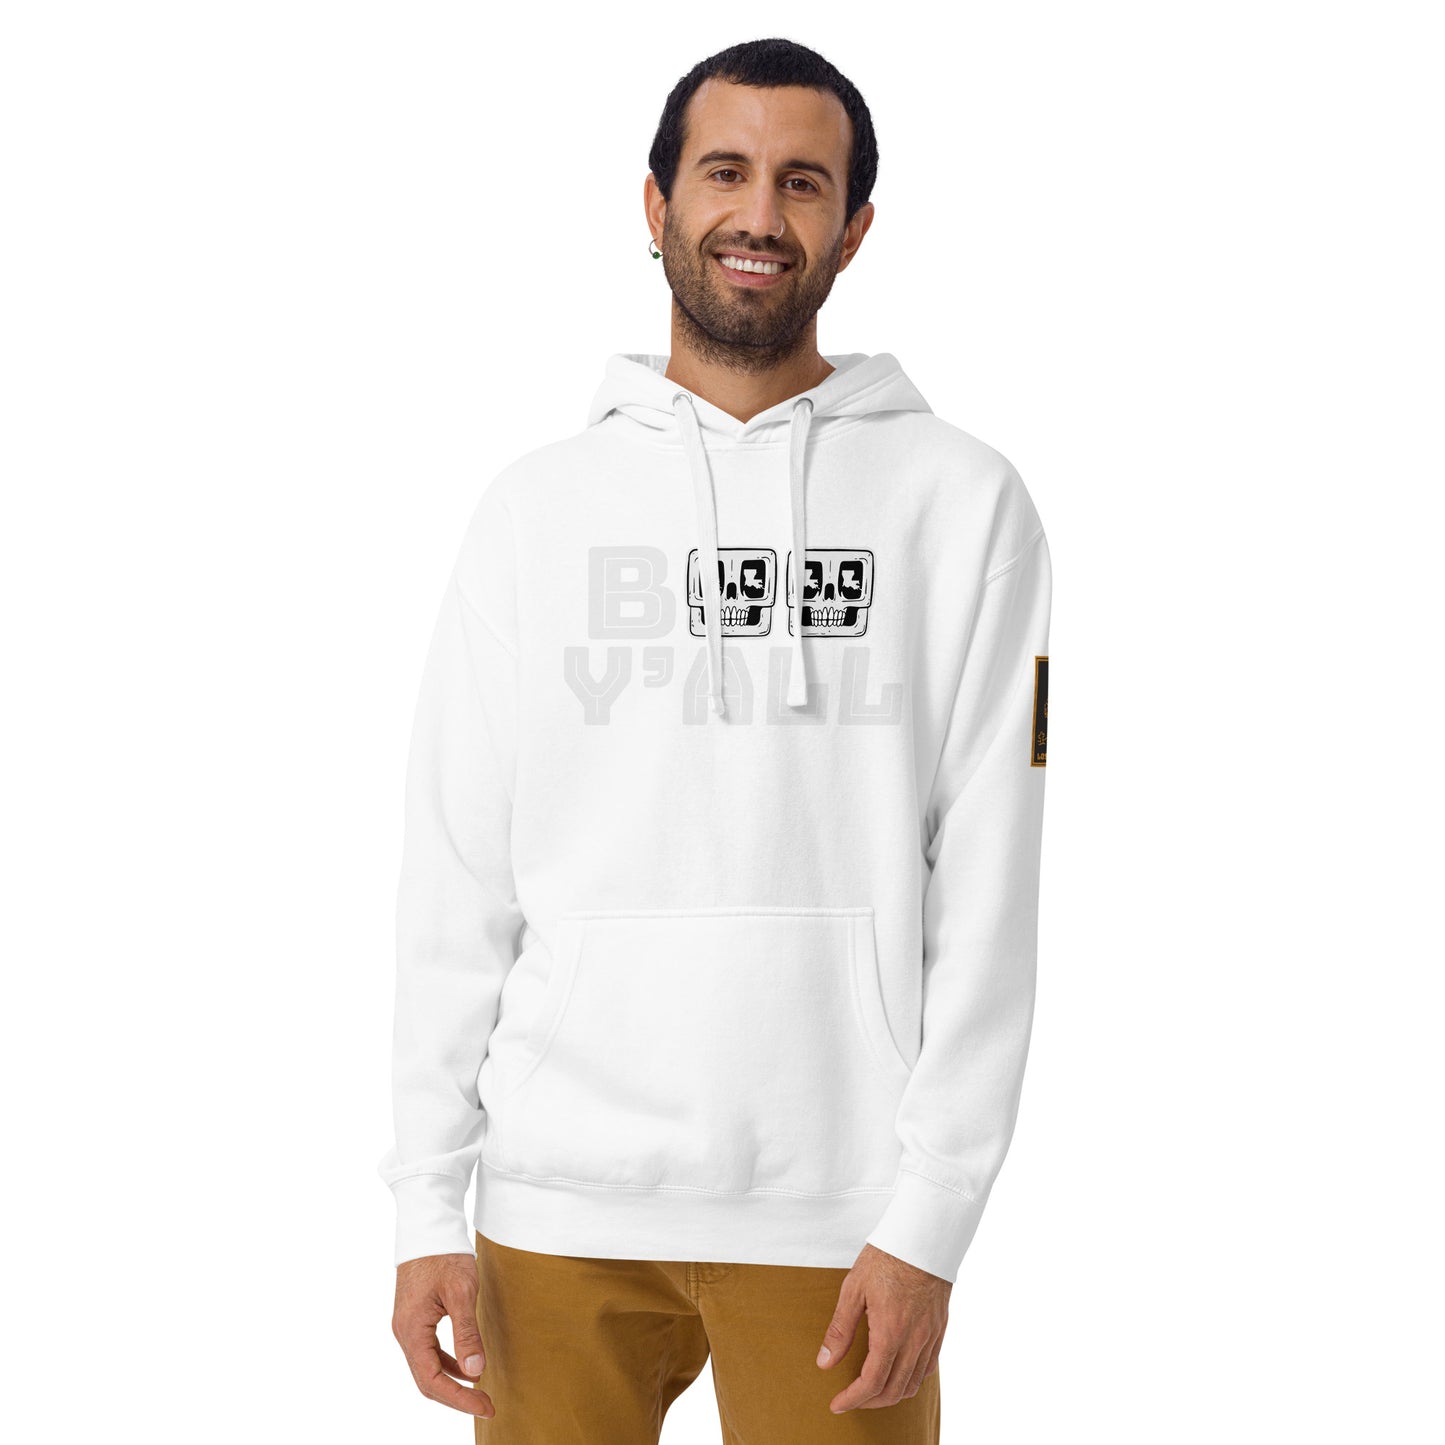 BOO Y'ALL - LOUISIANA SPECIAL - Unisex Hoodie